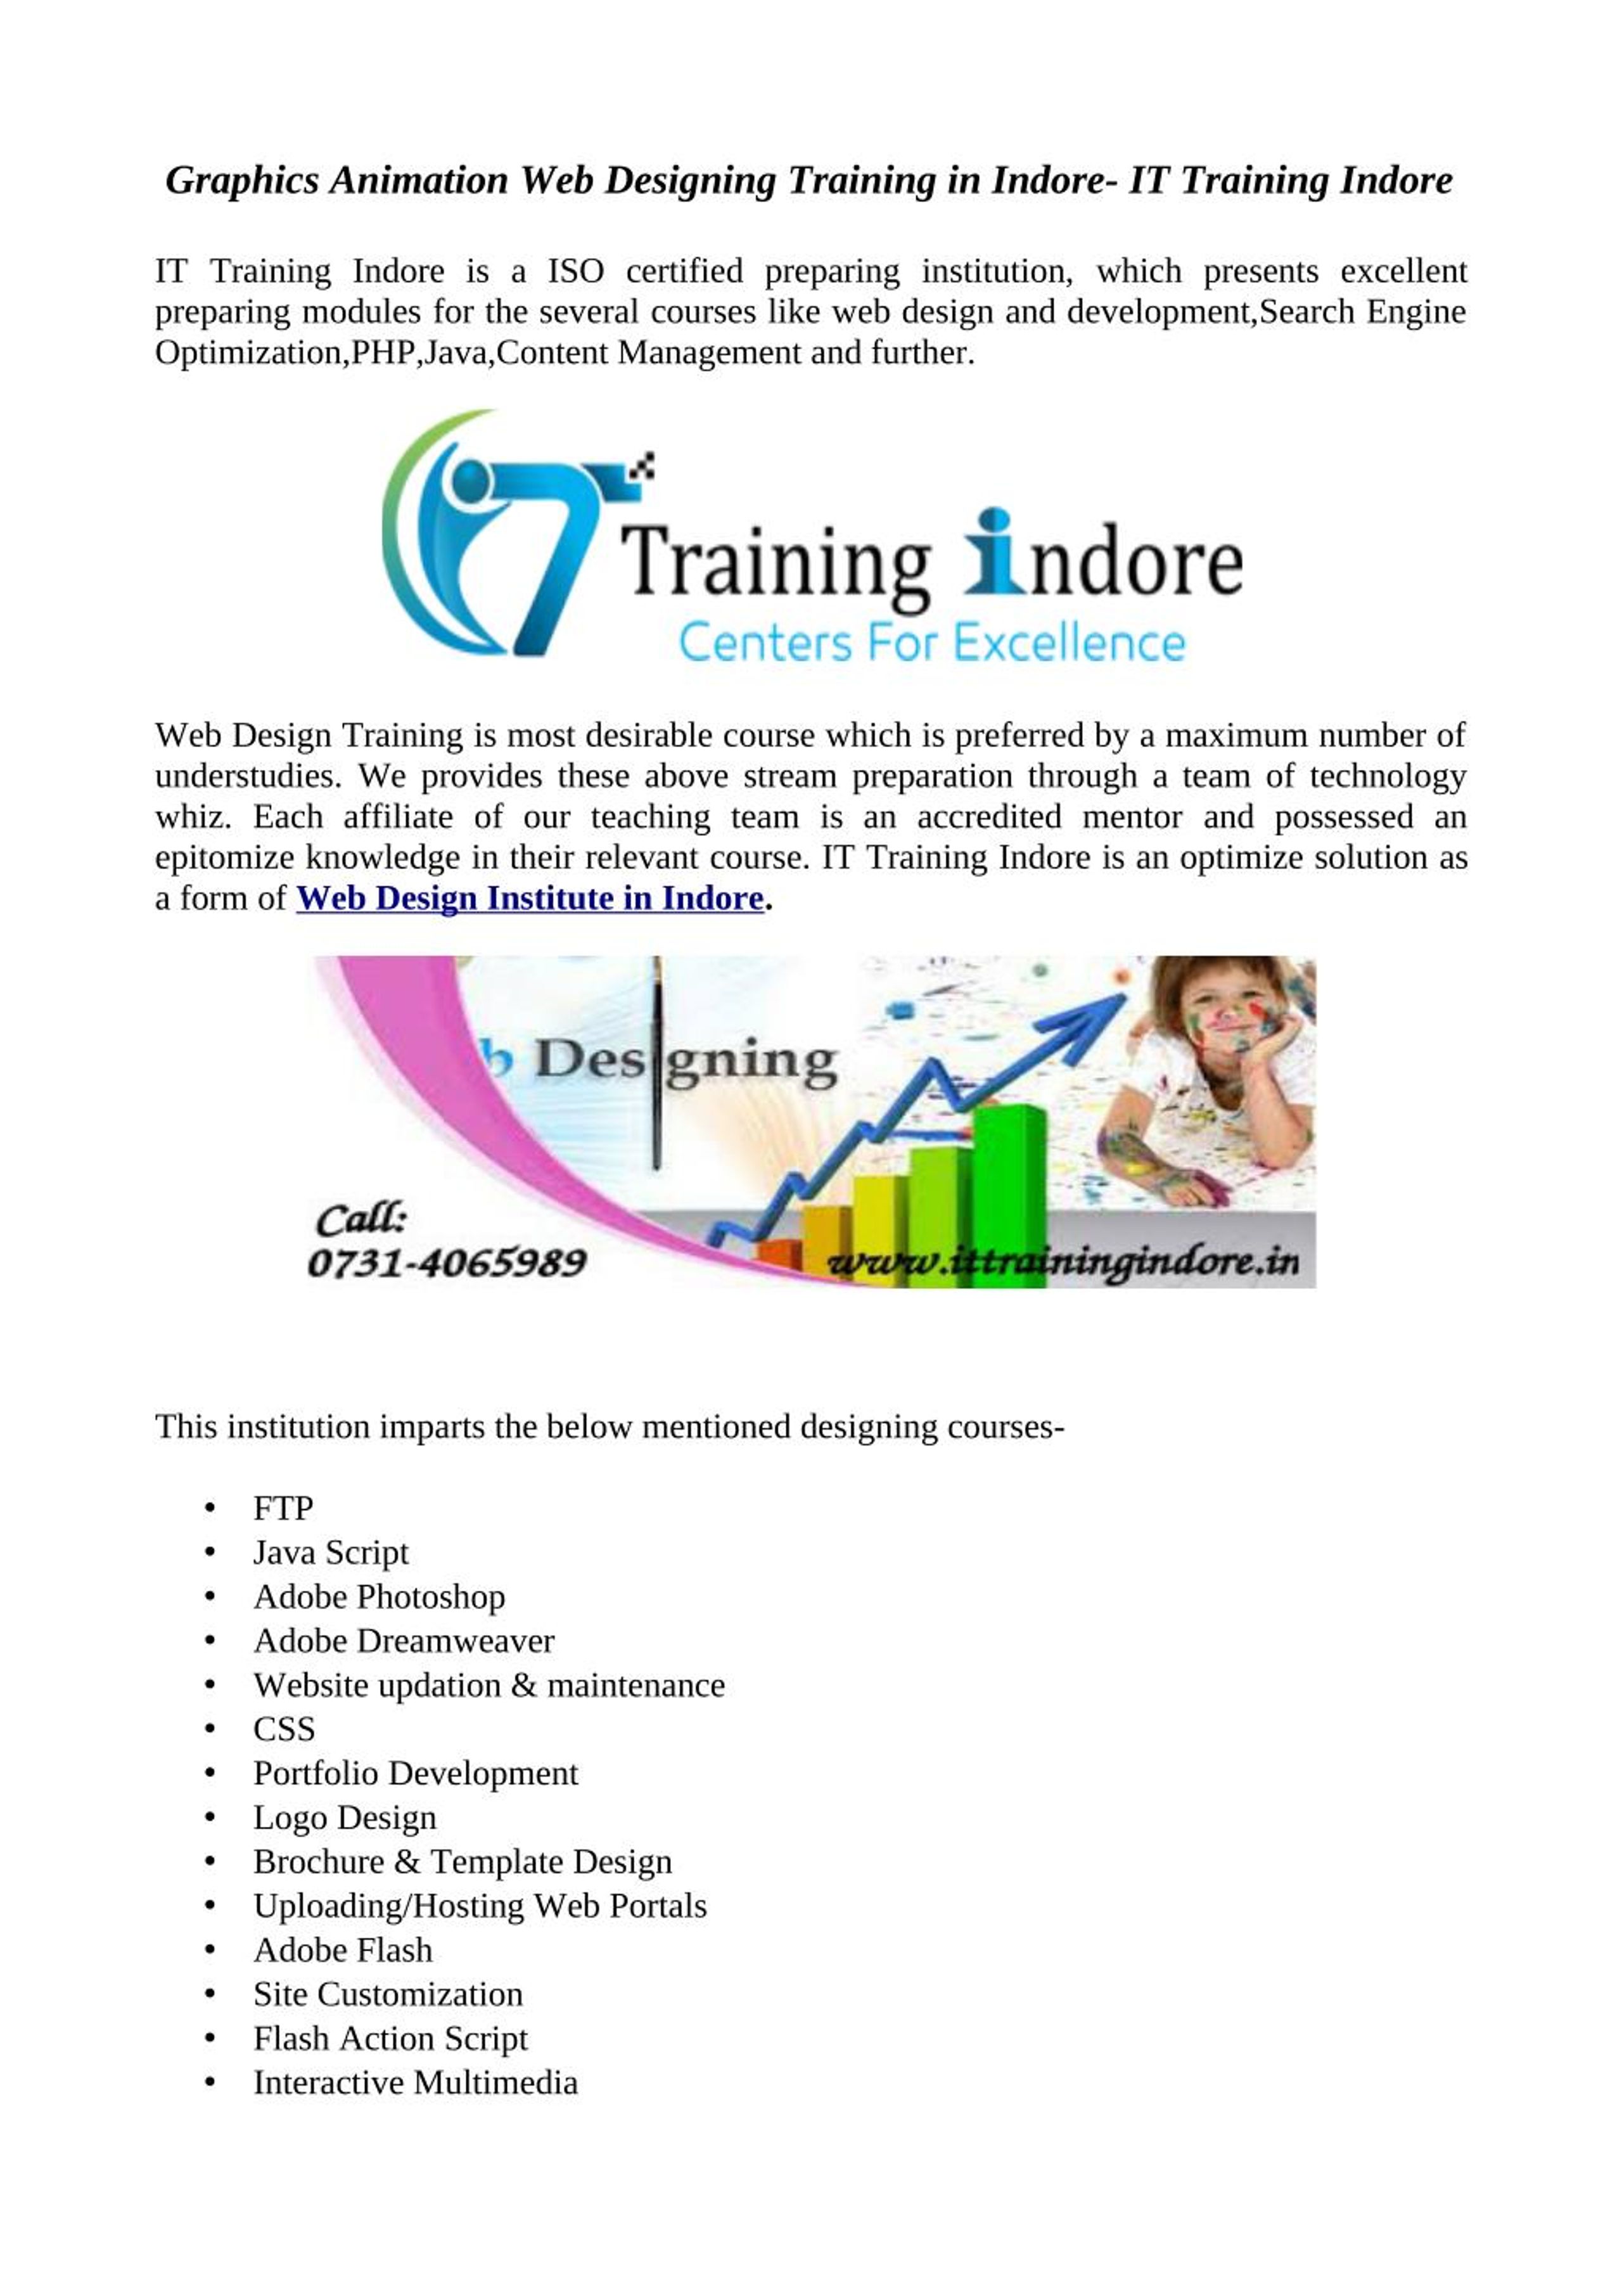 PPT - Best Web design training institute in Indore at IT Training Indore  PowerPoint Presentation - ID:7229827